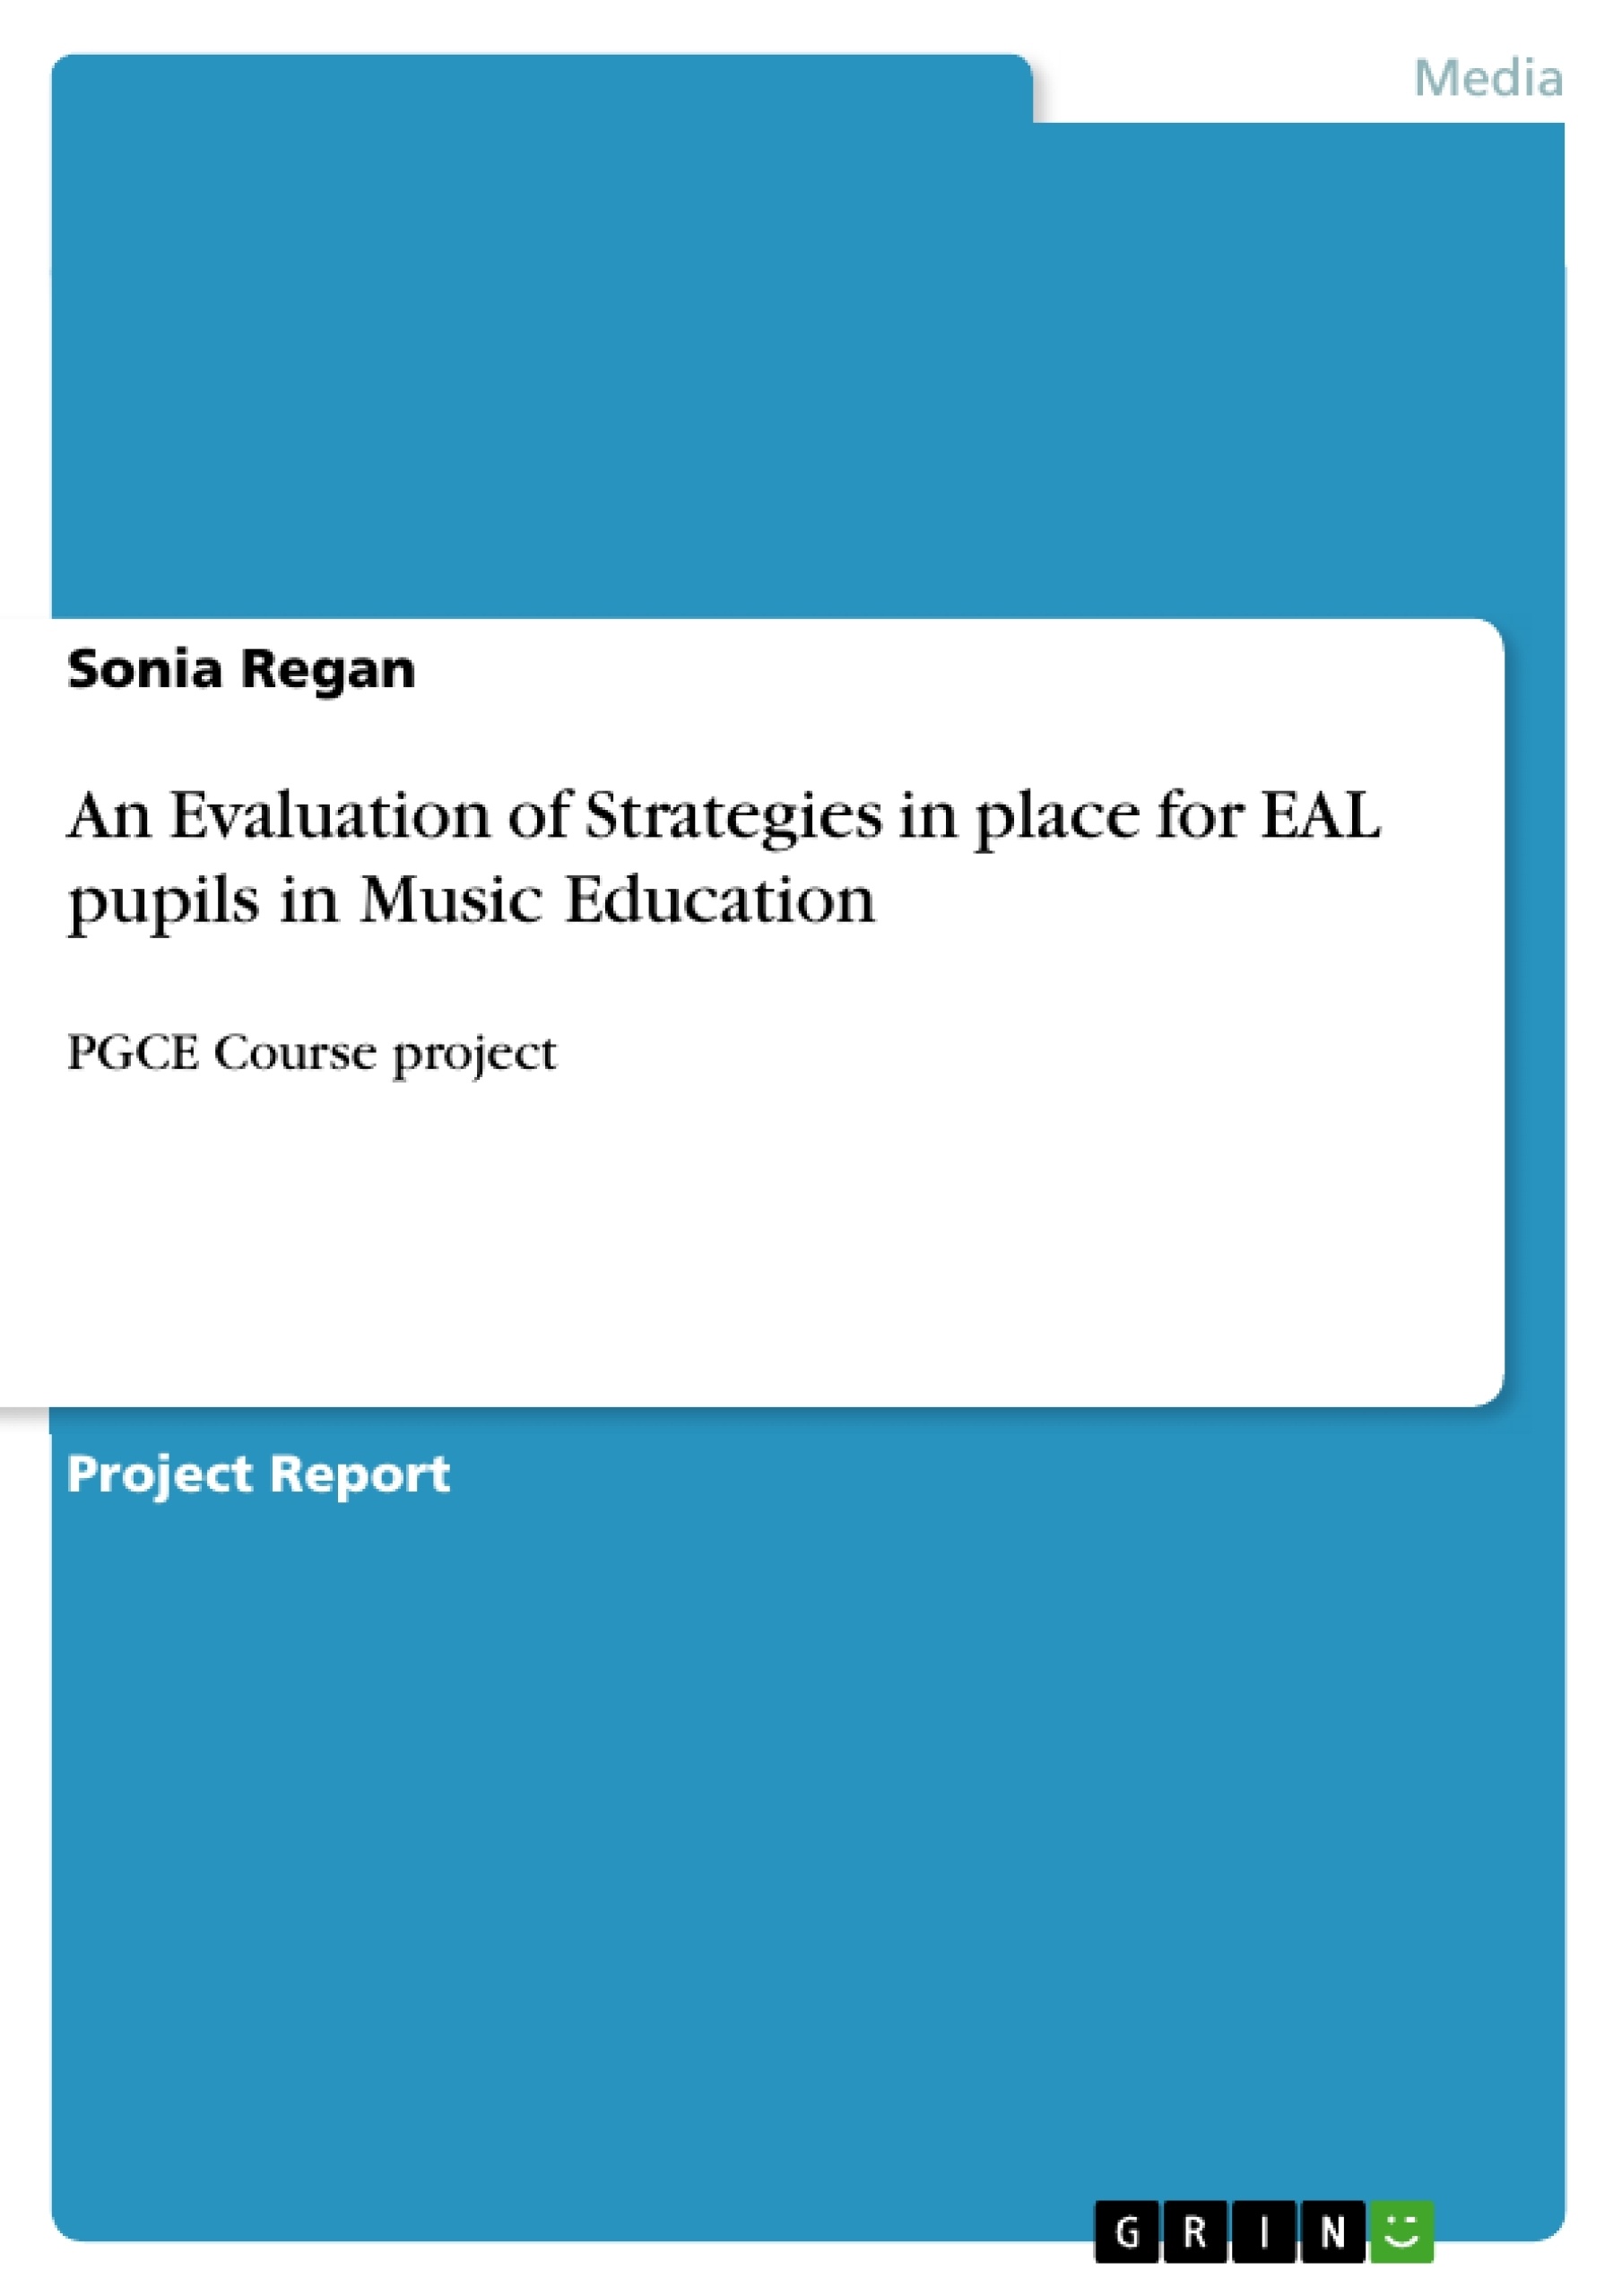 Título: An Evaluation of Strategies in place for EAL pupils in Music Education